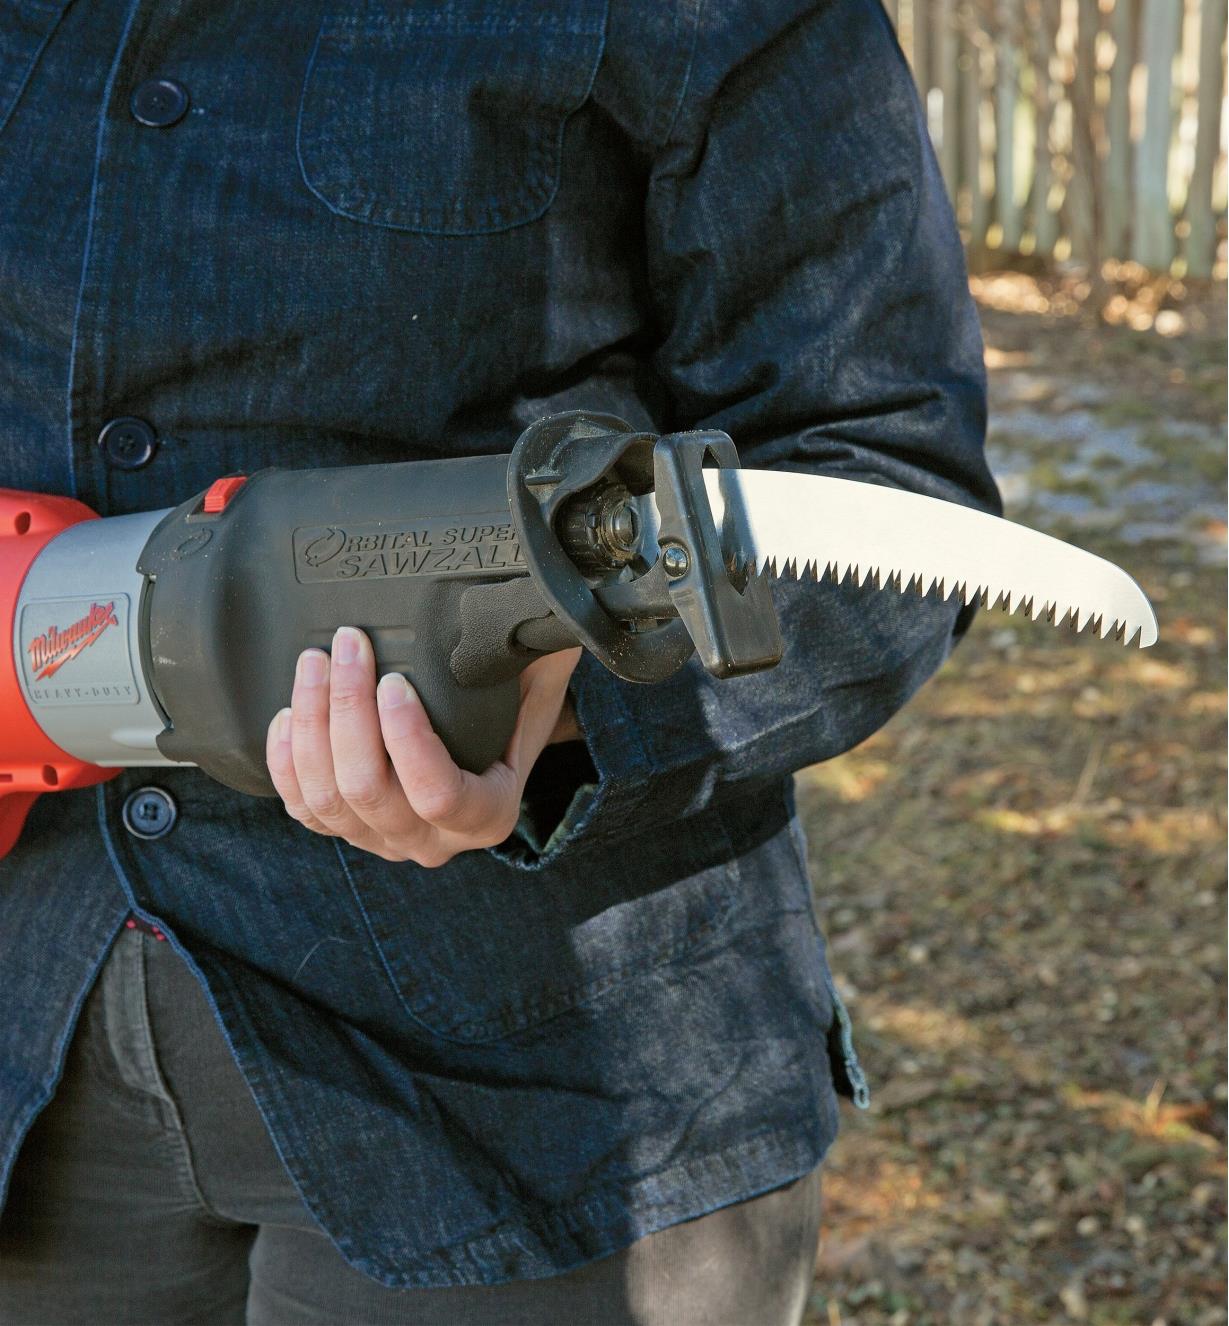 Pruning Blade installed in a reciprocating saw